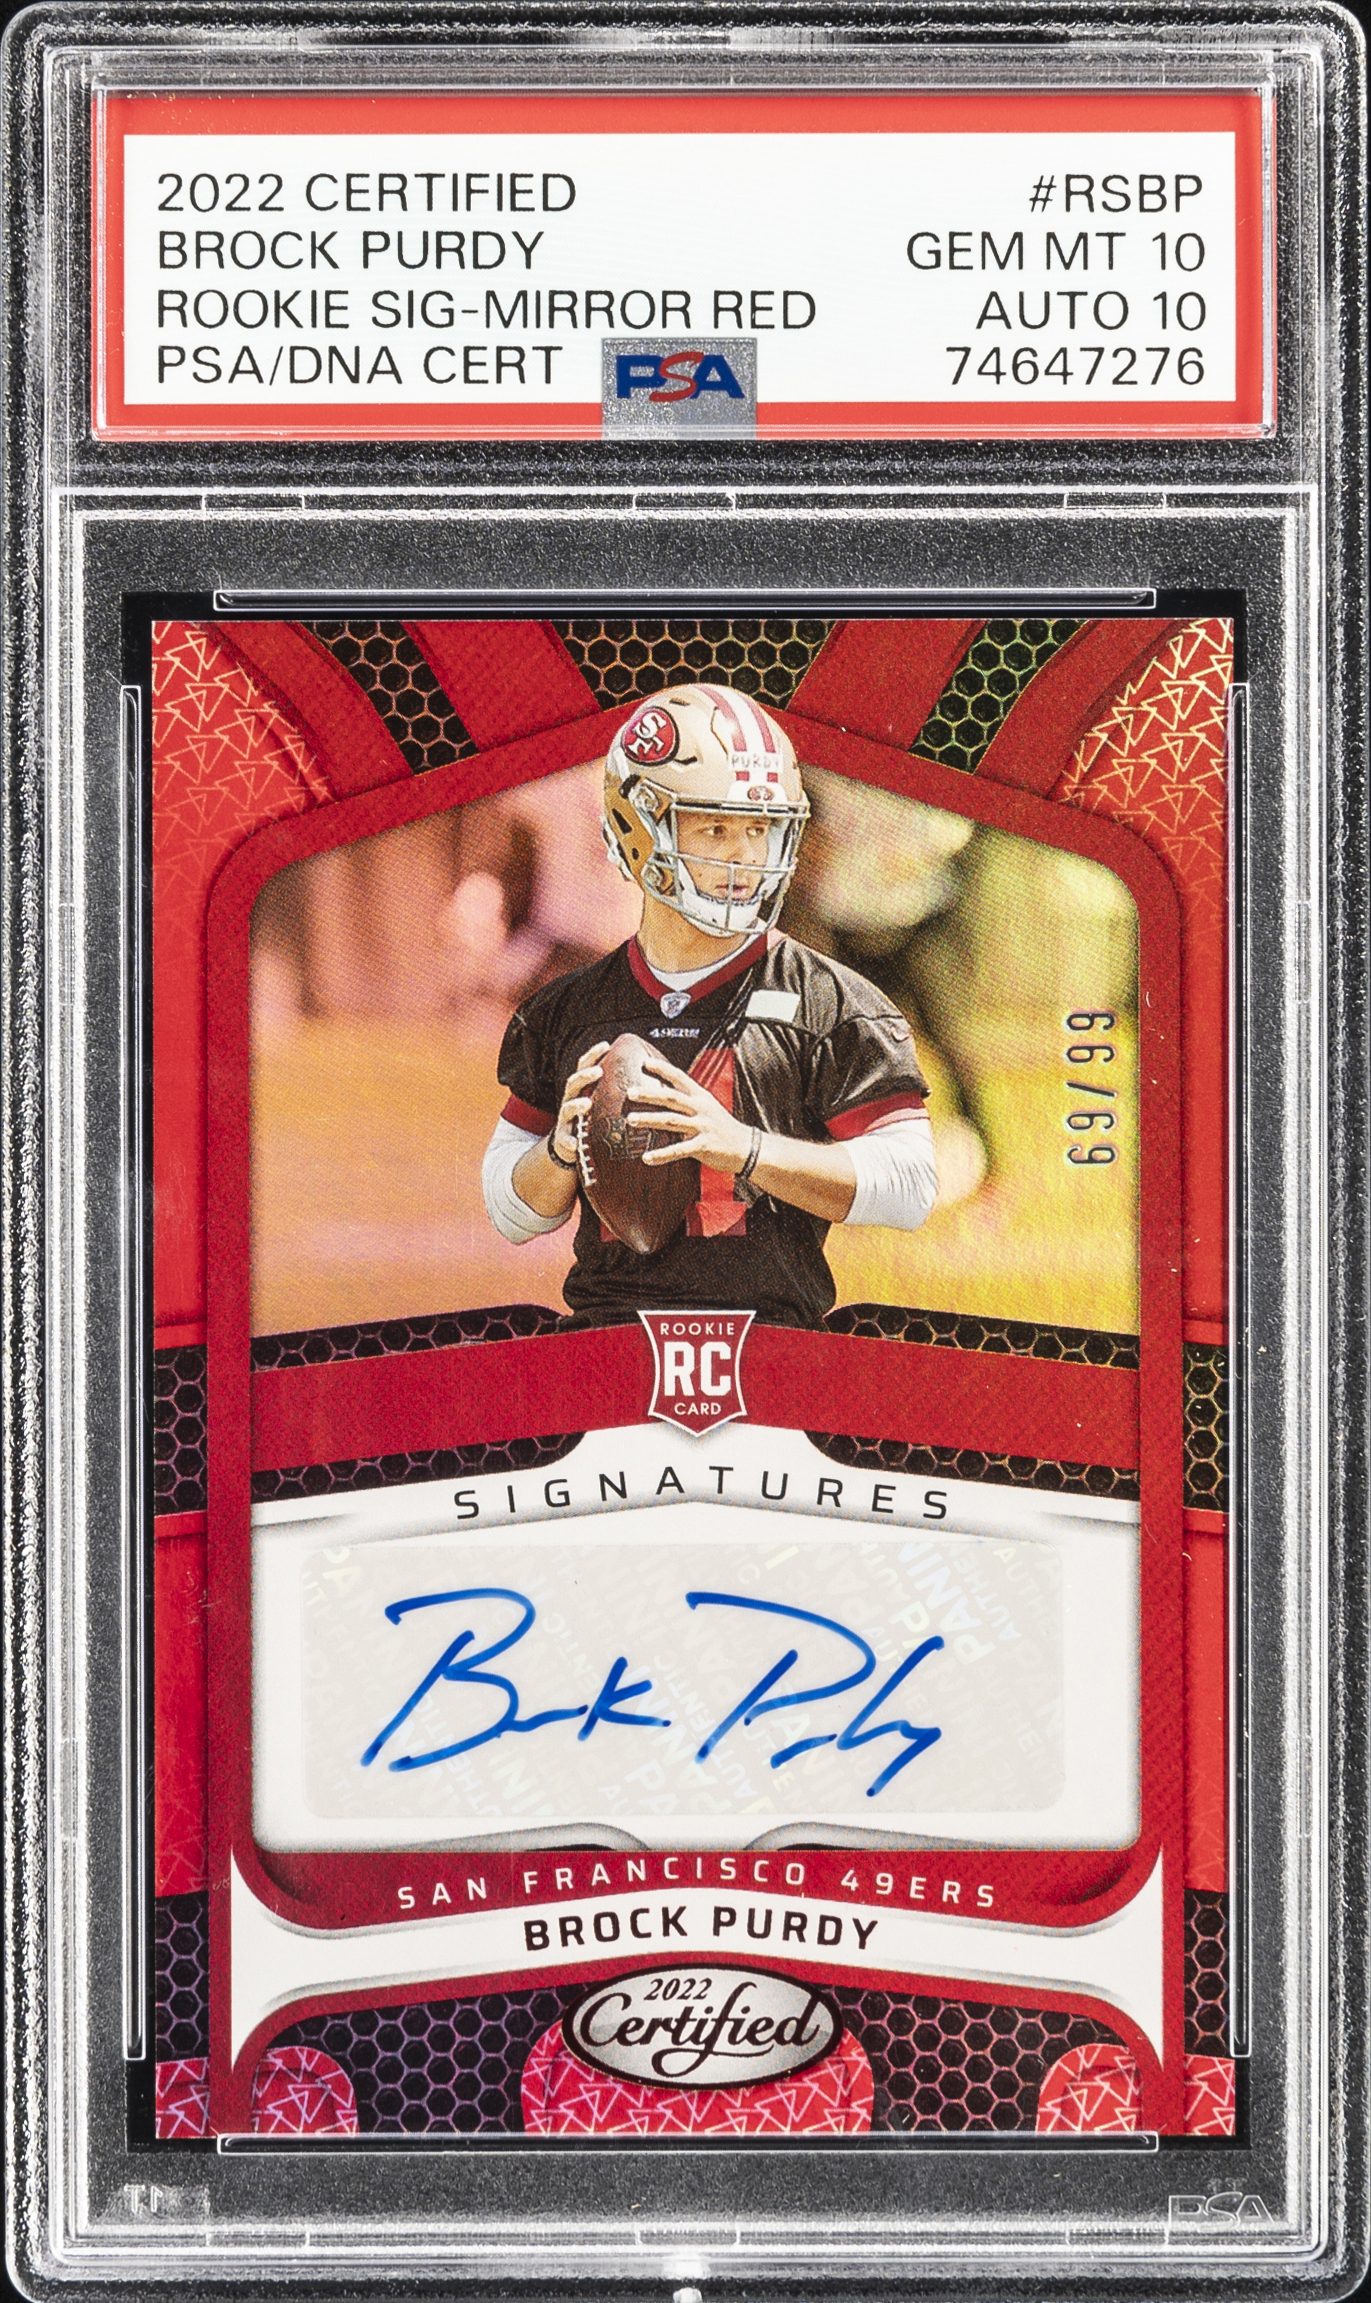 2022 Panini Certified Rookie Signatures Mirror Red #RSBP Brock Purdy Signed Rookie Card (#69/99) – PSA GEM MT 10